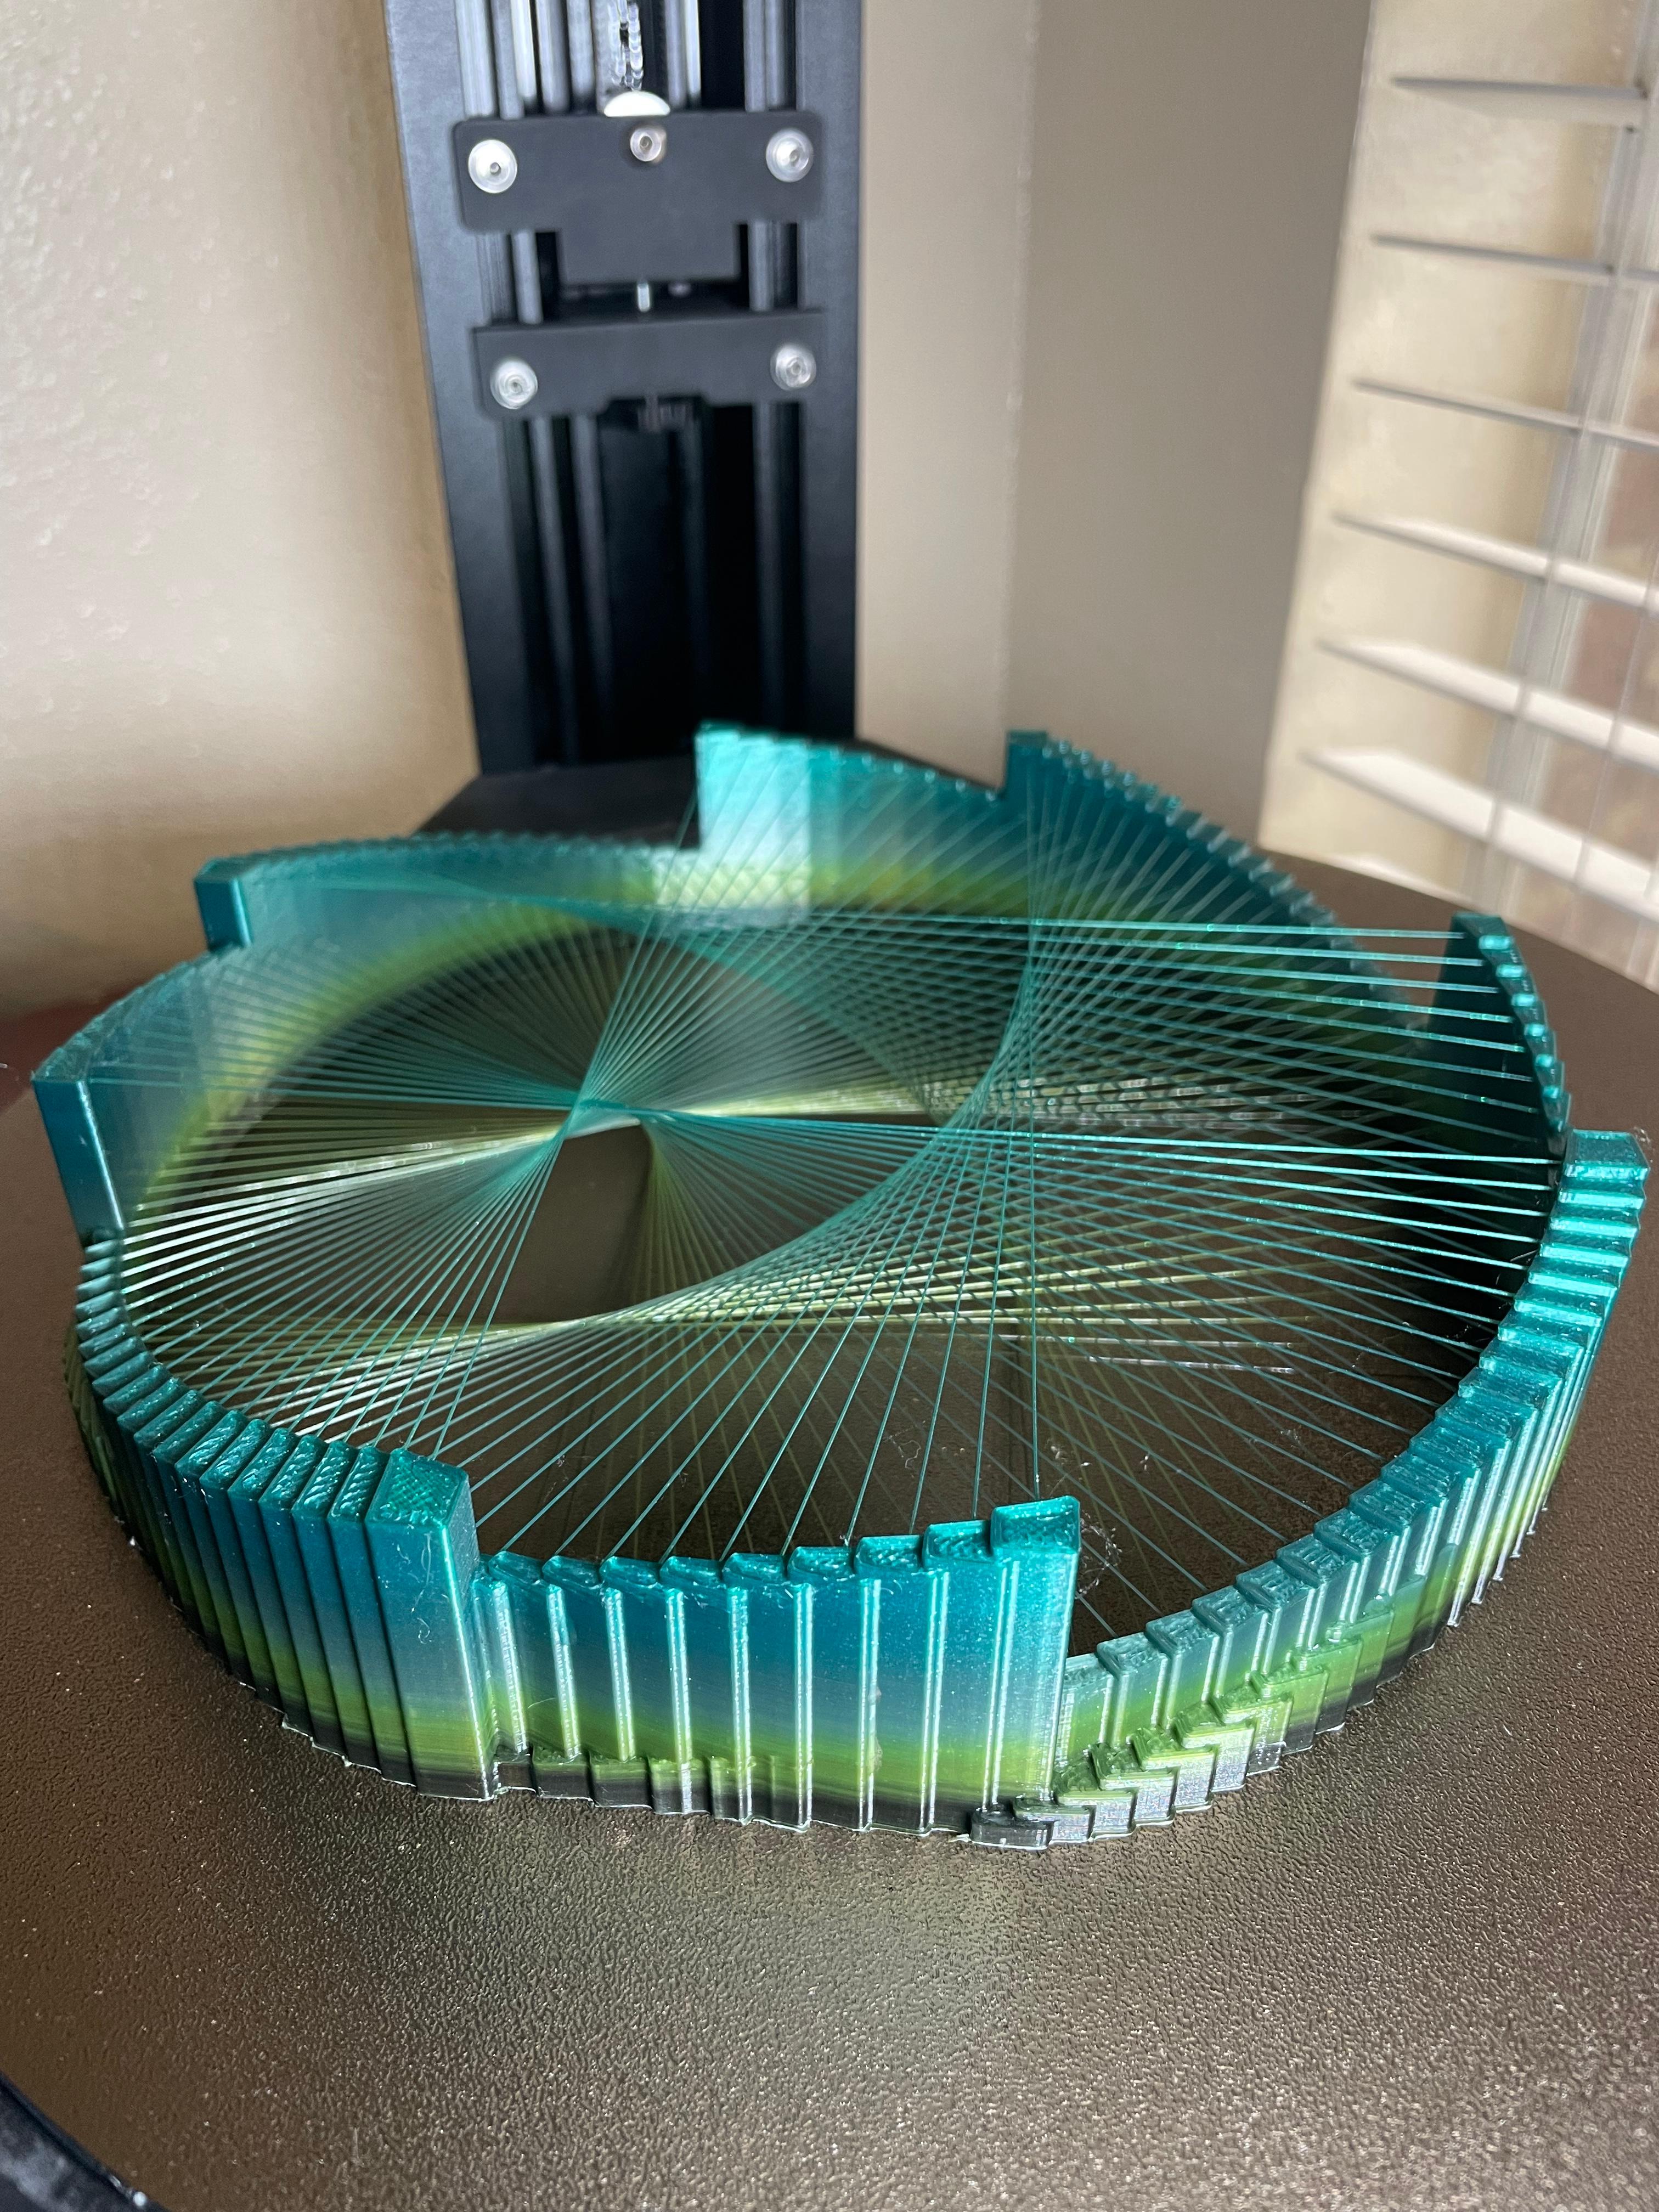 Layers String Art - I didn’t even know my printer could do this lol.  - 3d model